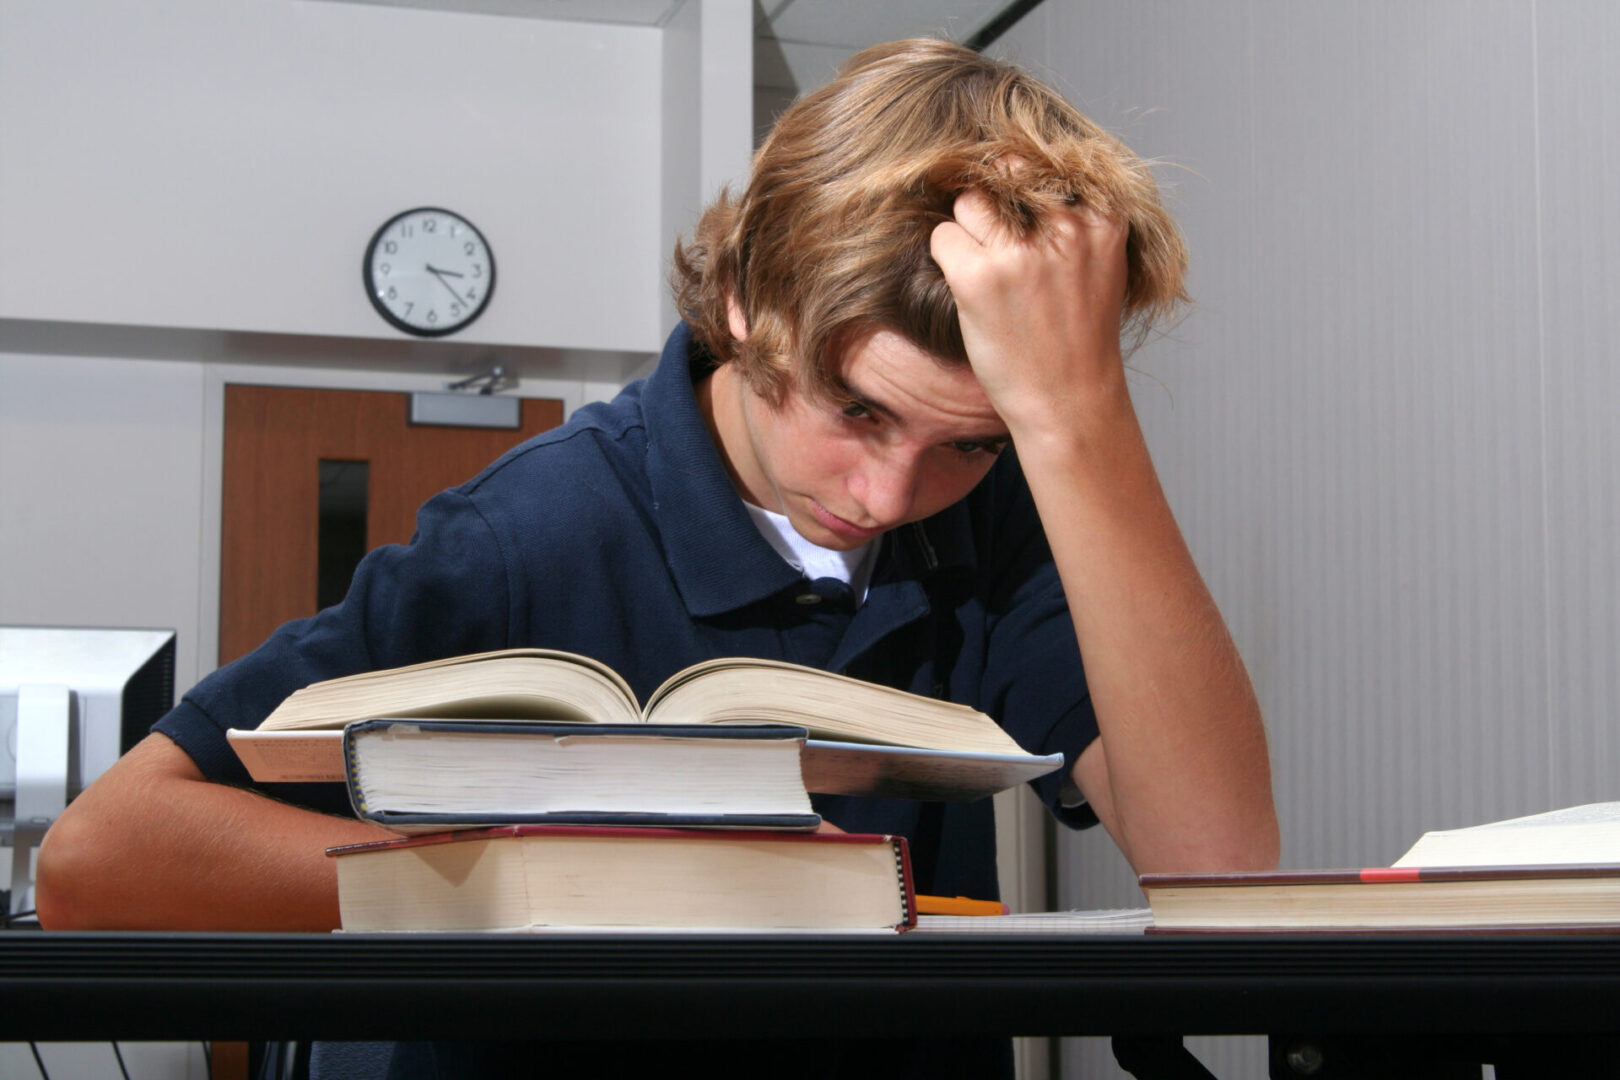 Frustrated student fed up with school work